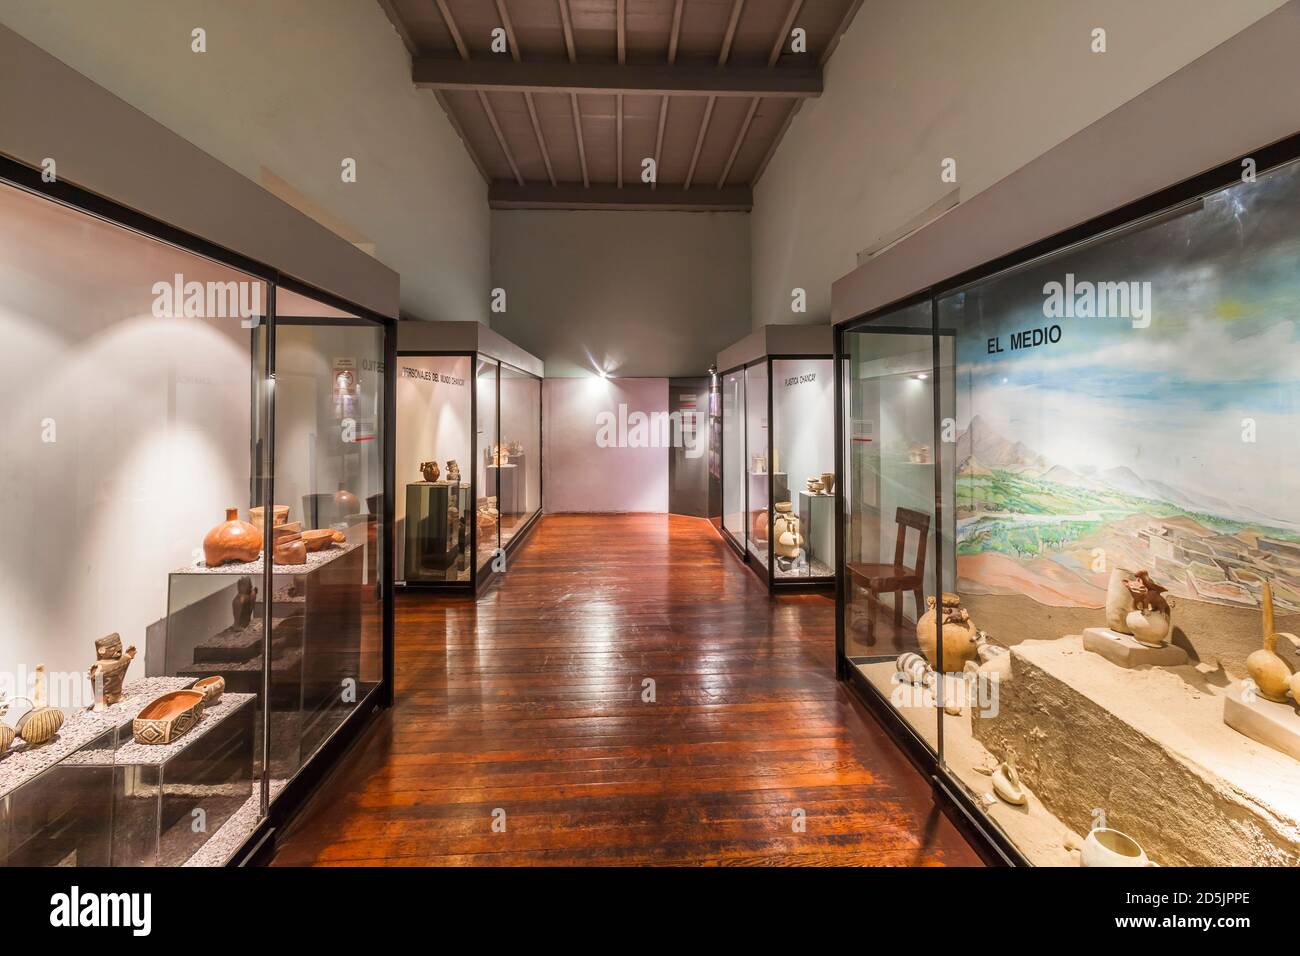 The Chancay culture collection gallery,Pre-Columbian, 'National Museum of Archaeology, Anthropology and History of Peru', Lima, Peru, South America Stock Photo